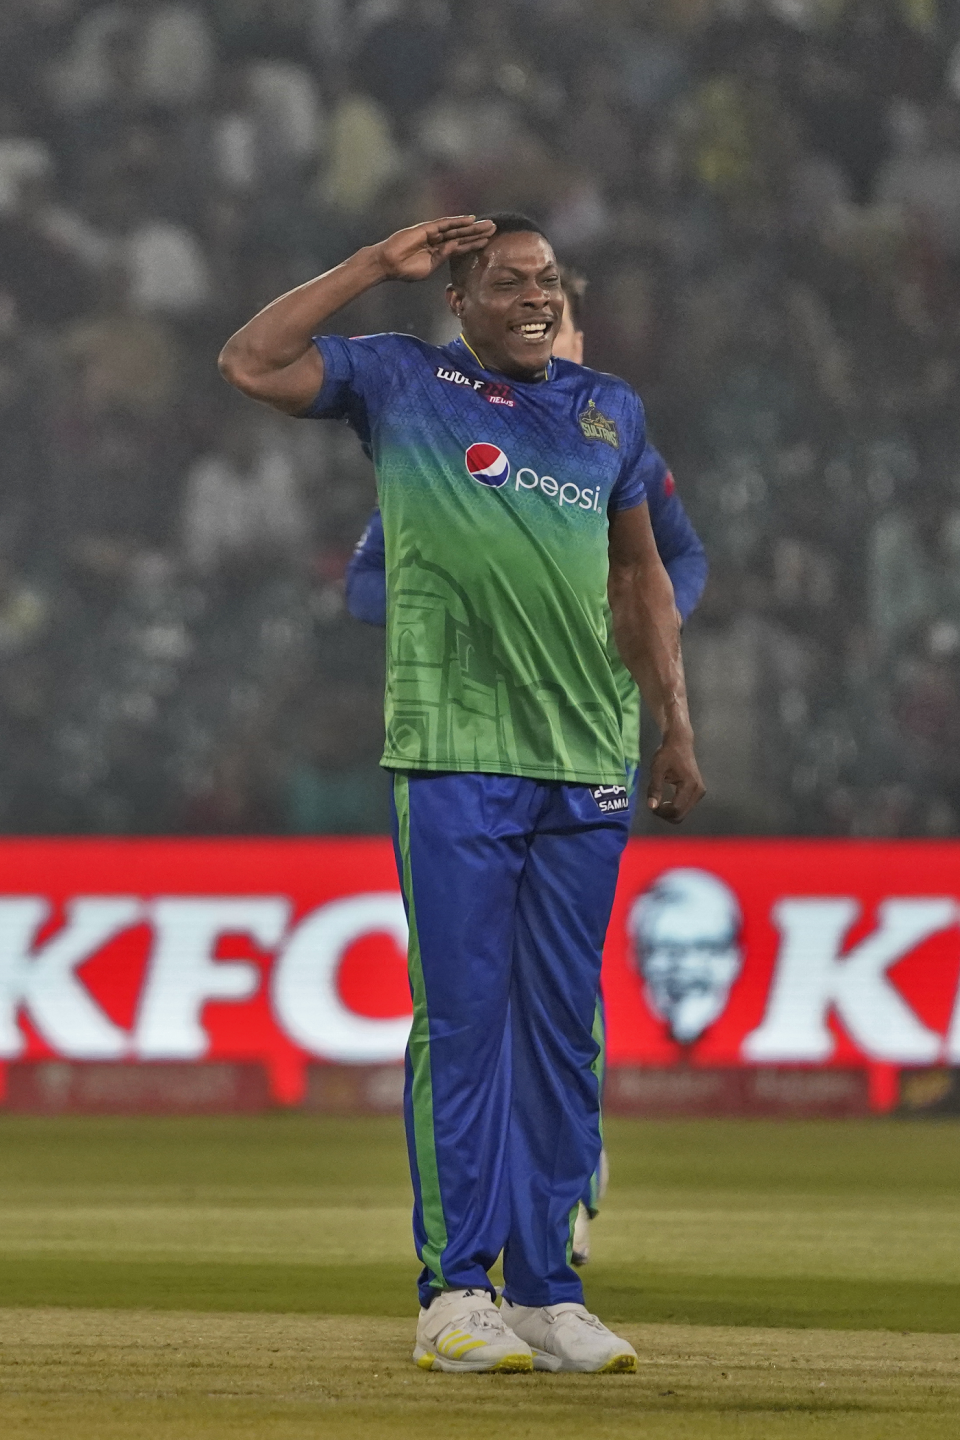 Sheldon Cottrell celebrates with his signature salute after a top order wicket, Lahore Qalandars vs Multan Sultans, PSL, Lahore, March 15, 2023